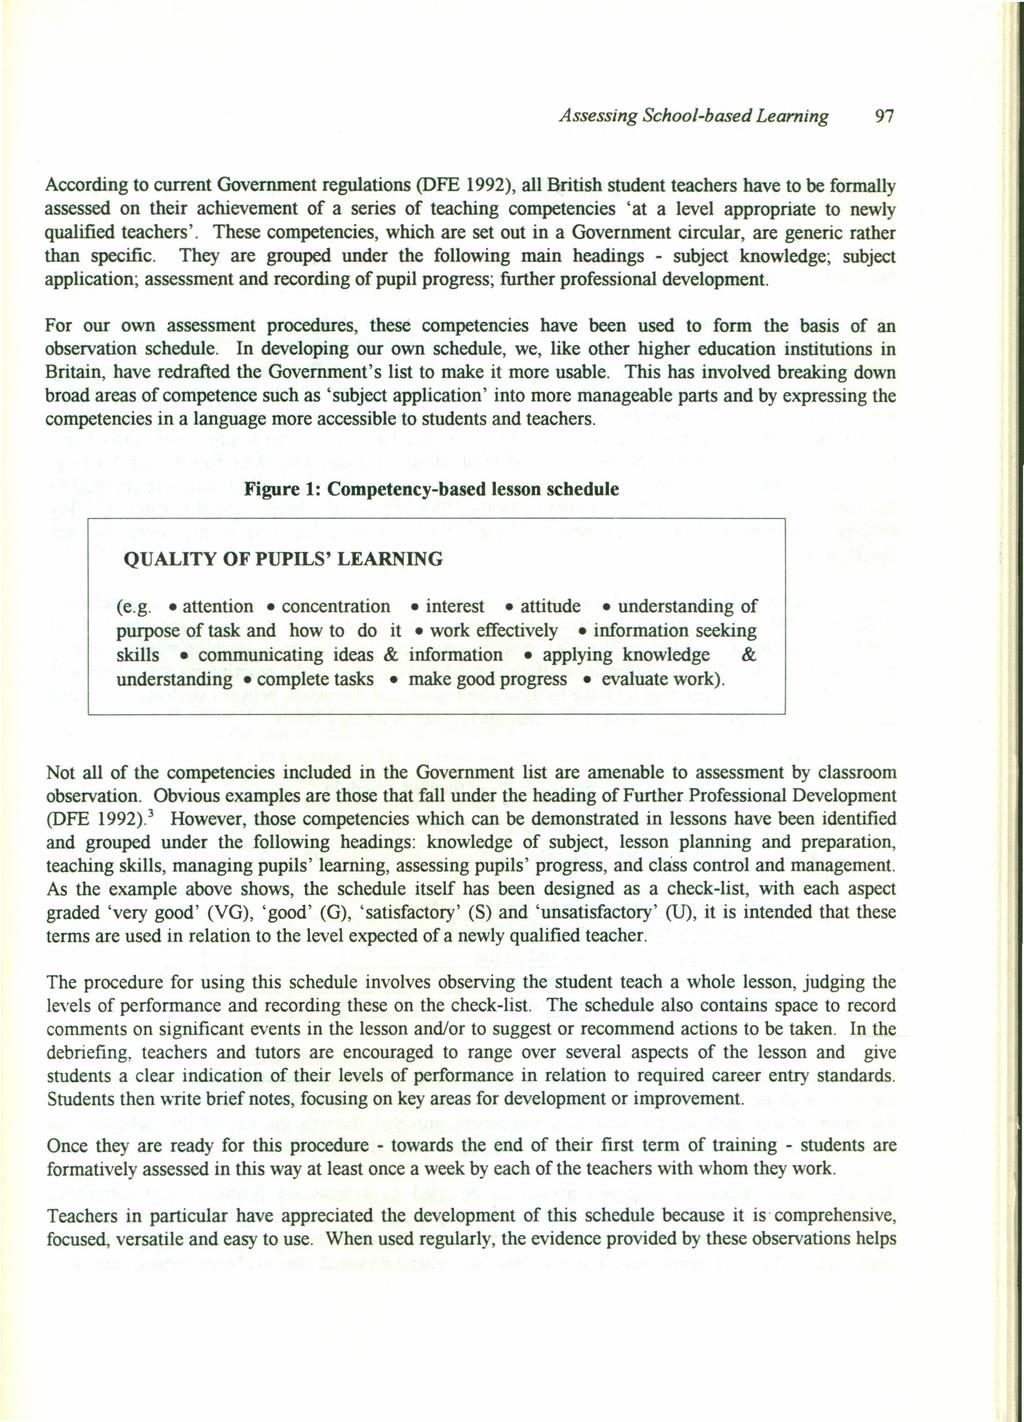 Assessing School-based Learning 97 According to current Government regulations (DFE 1992), all British student teachers have to be formally assessed on their achievement of a series of teaching